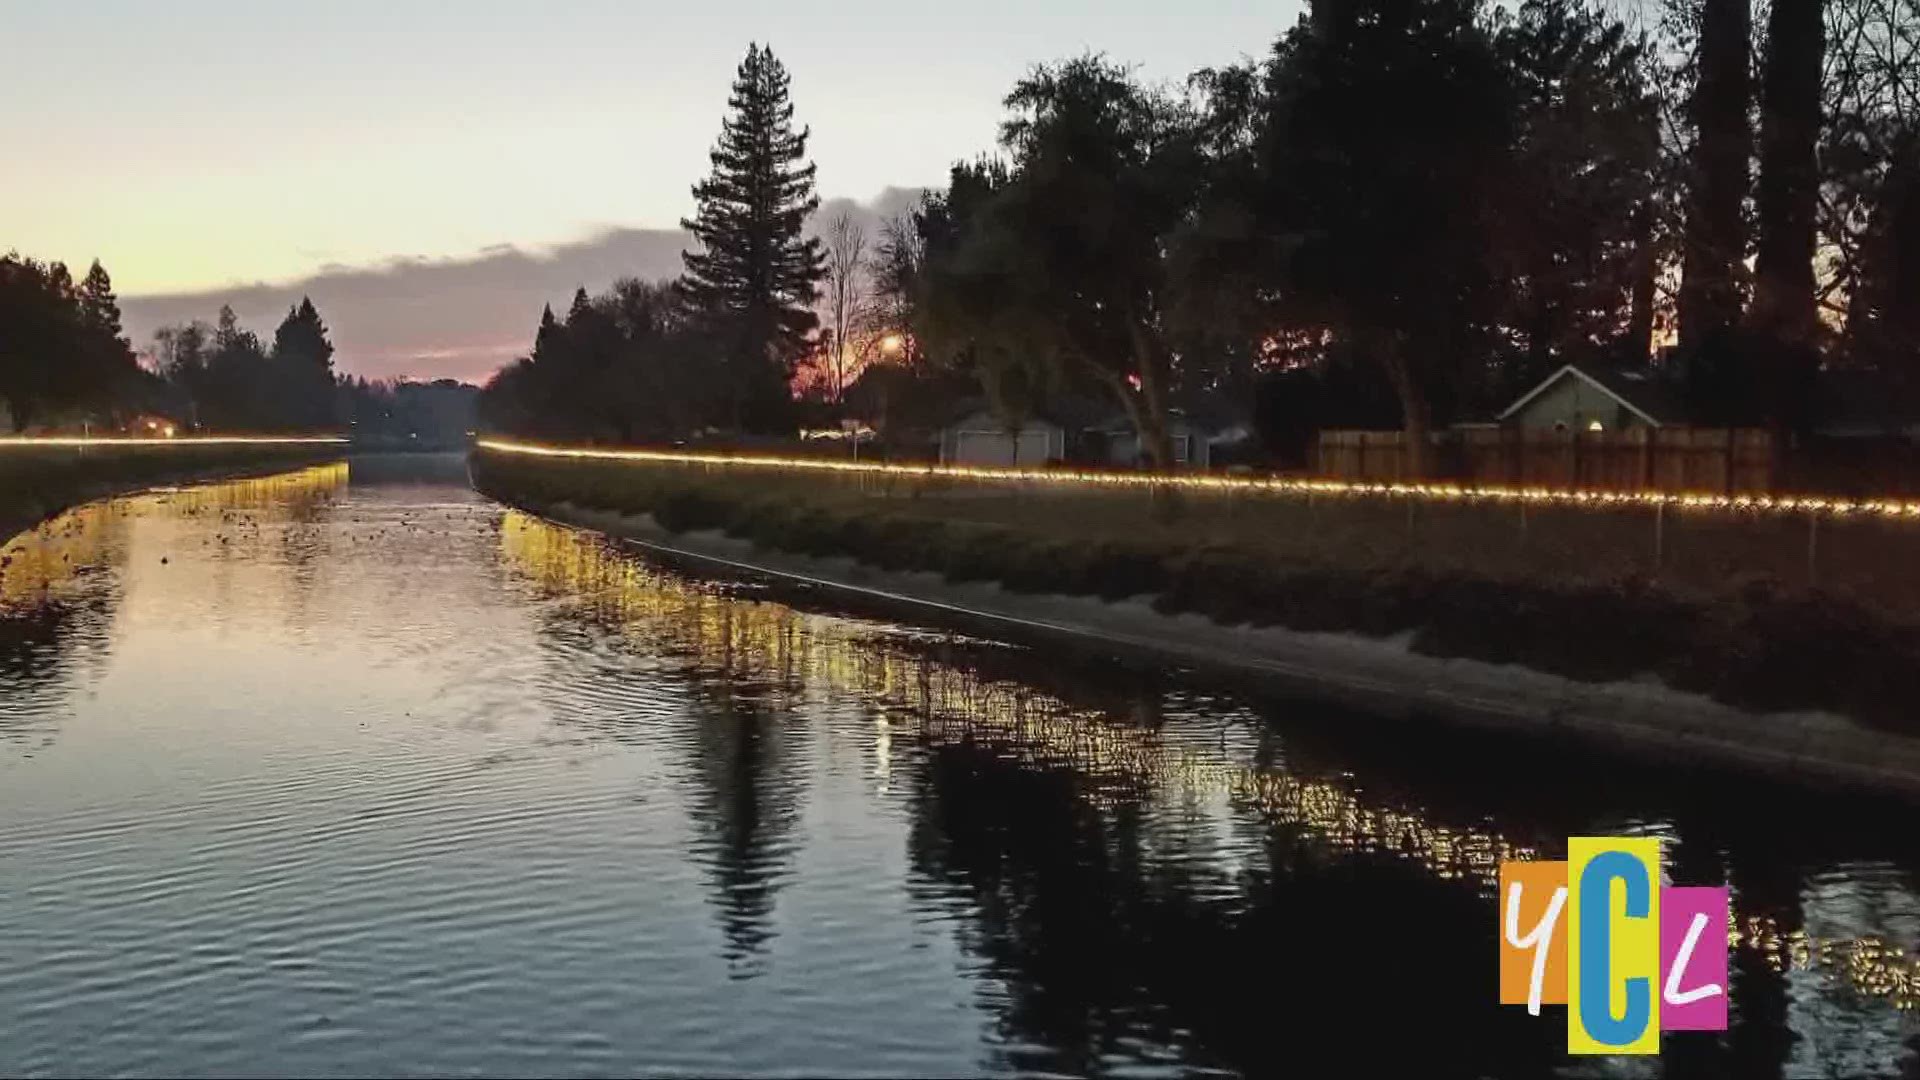 27th annual Sacramento Lighted Boat Parade this Saturday